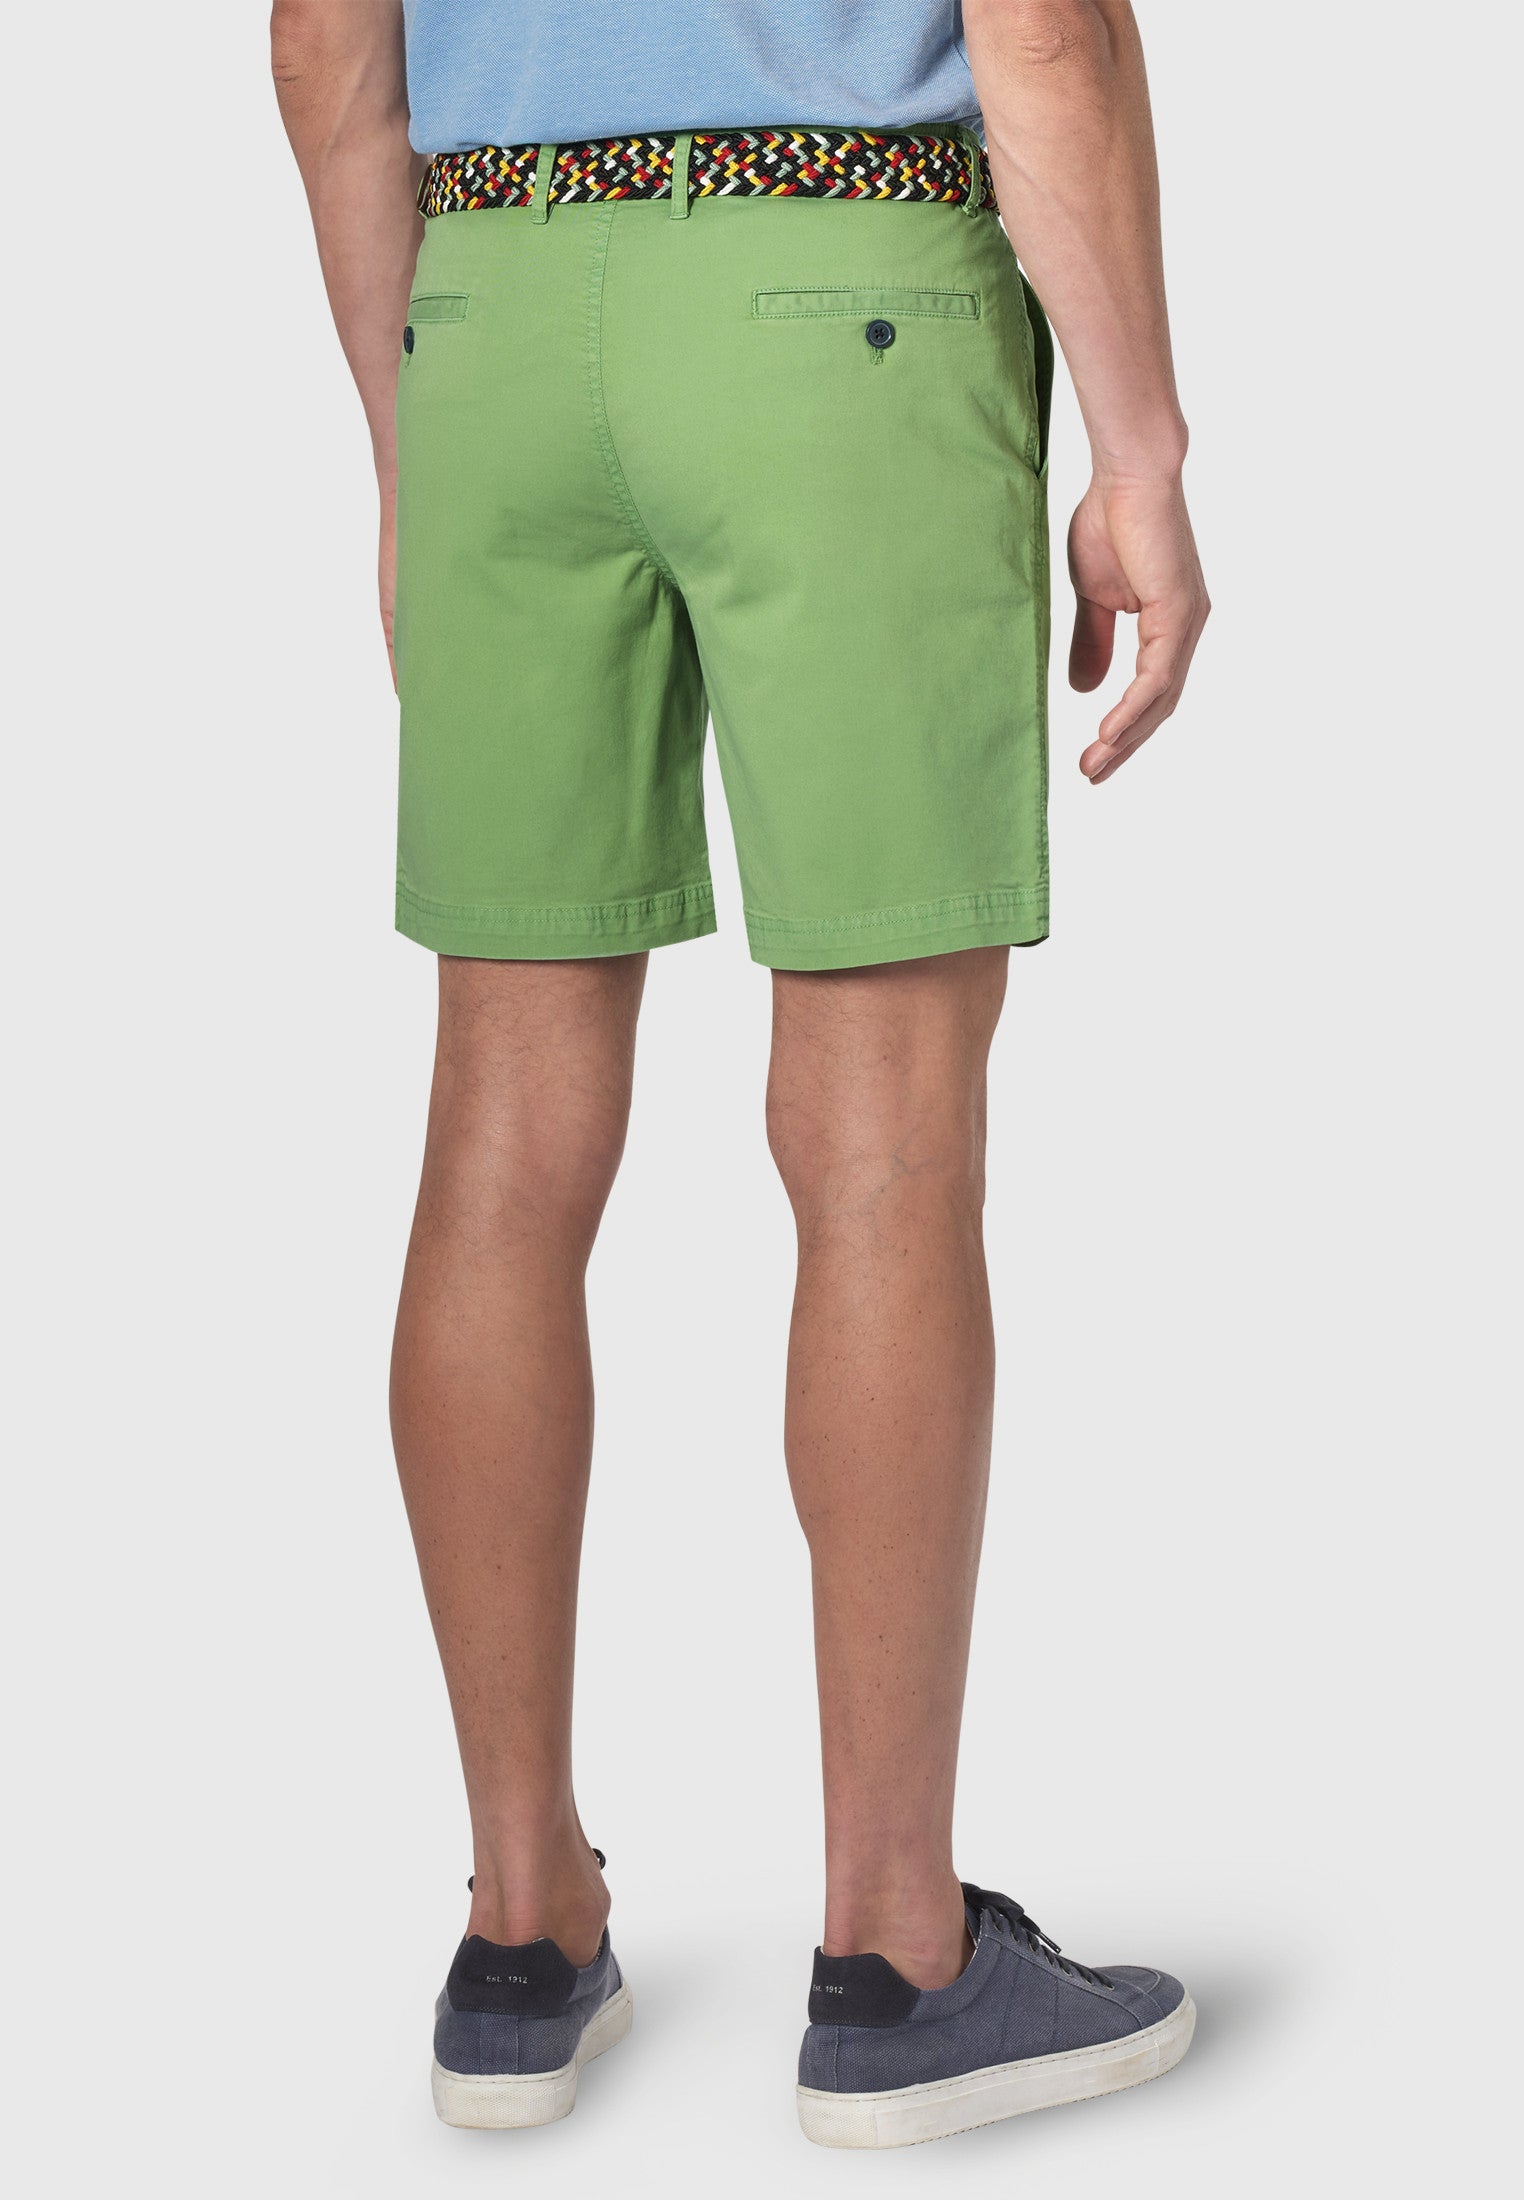 Ribblesdale Apple Cotton Stretch Summer Shorts